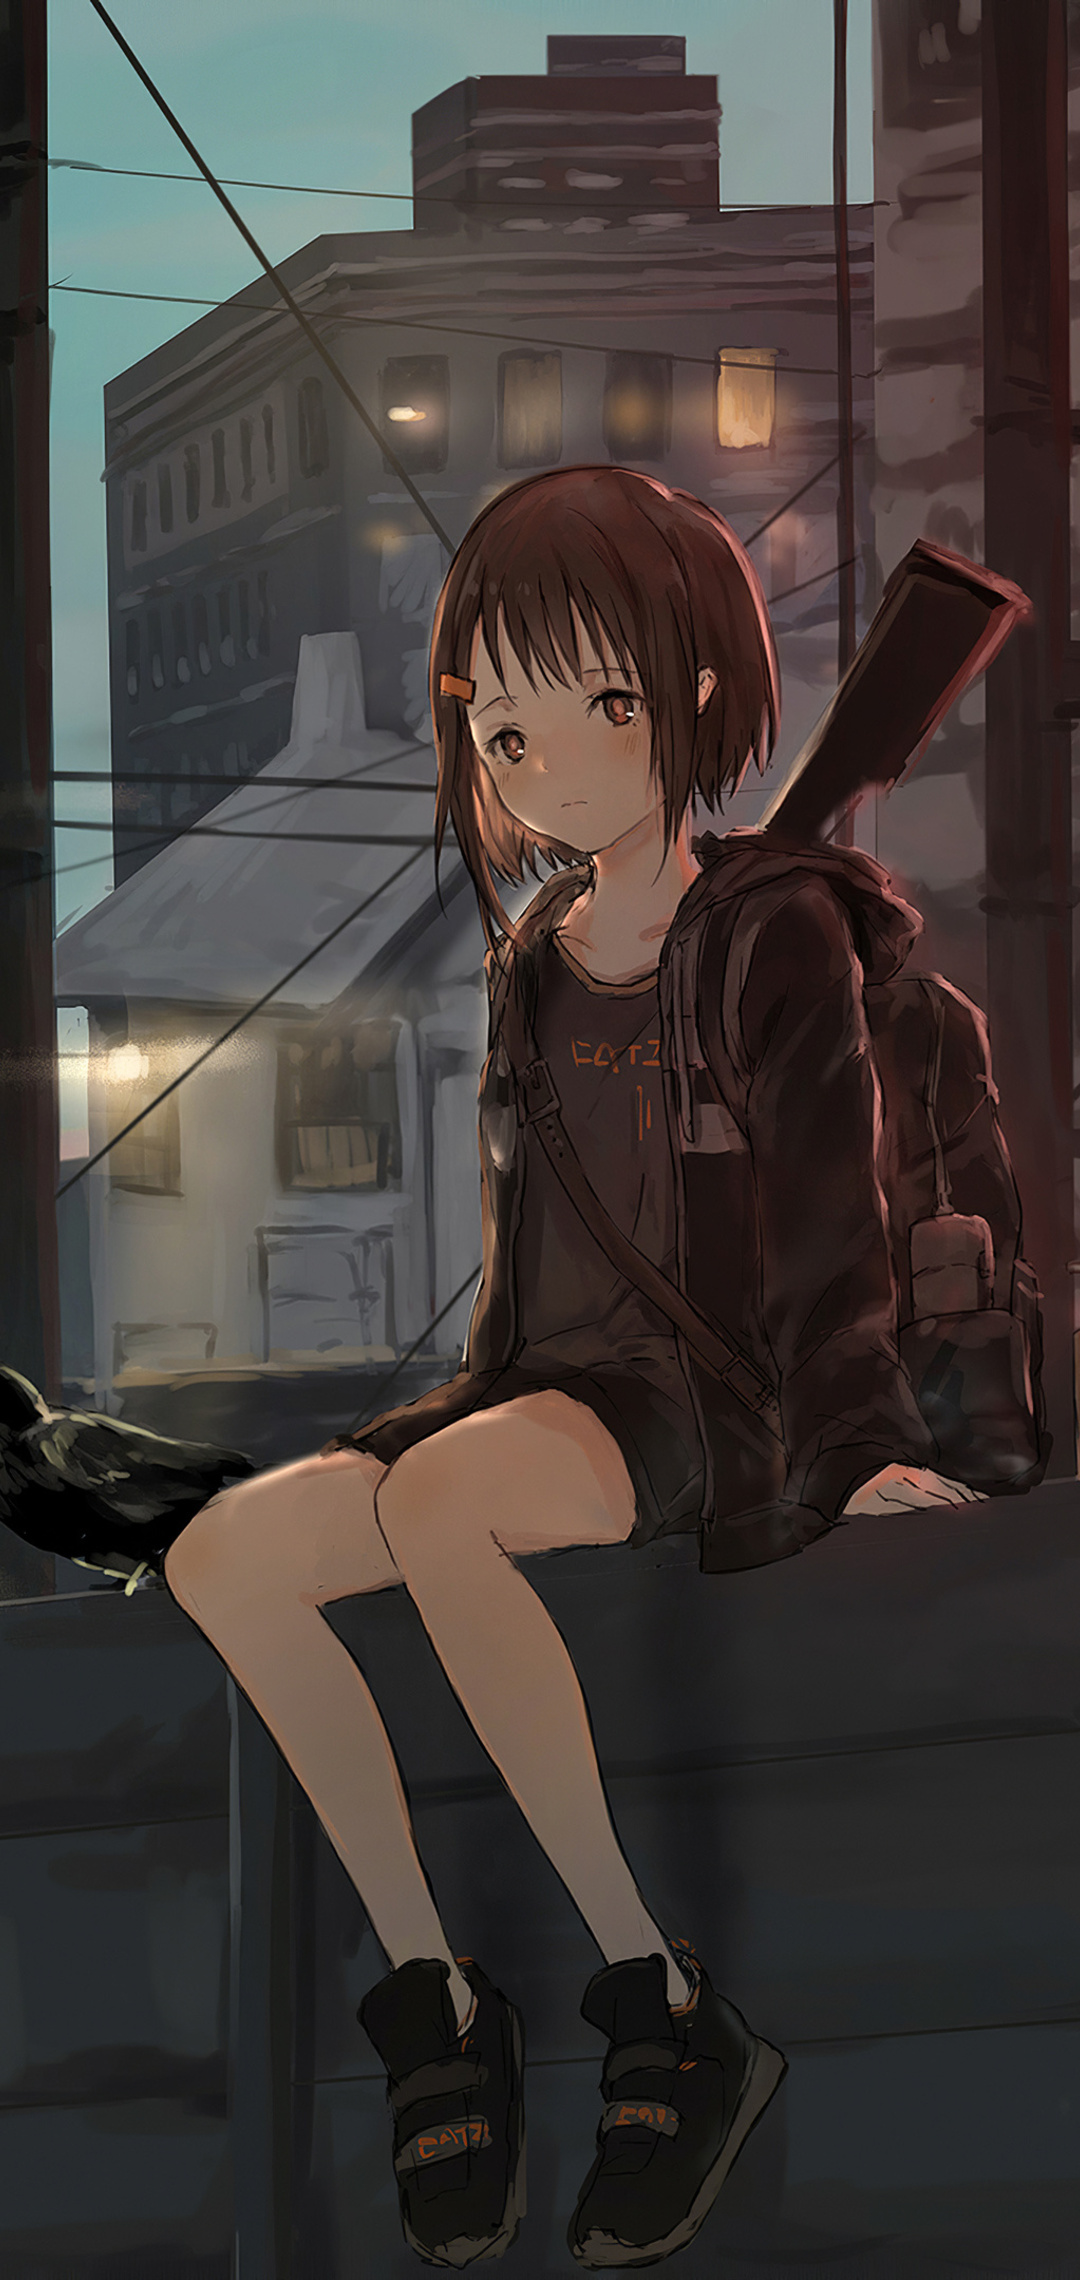 1920x1200 / Girl, Anime, Hair, Brunette, Negative, Attitude, Gesture  wallpaper - Coolwallpapers.me!